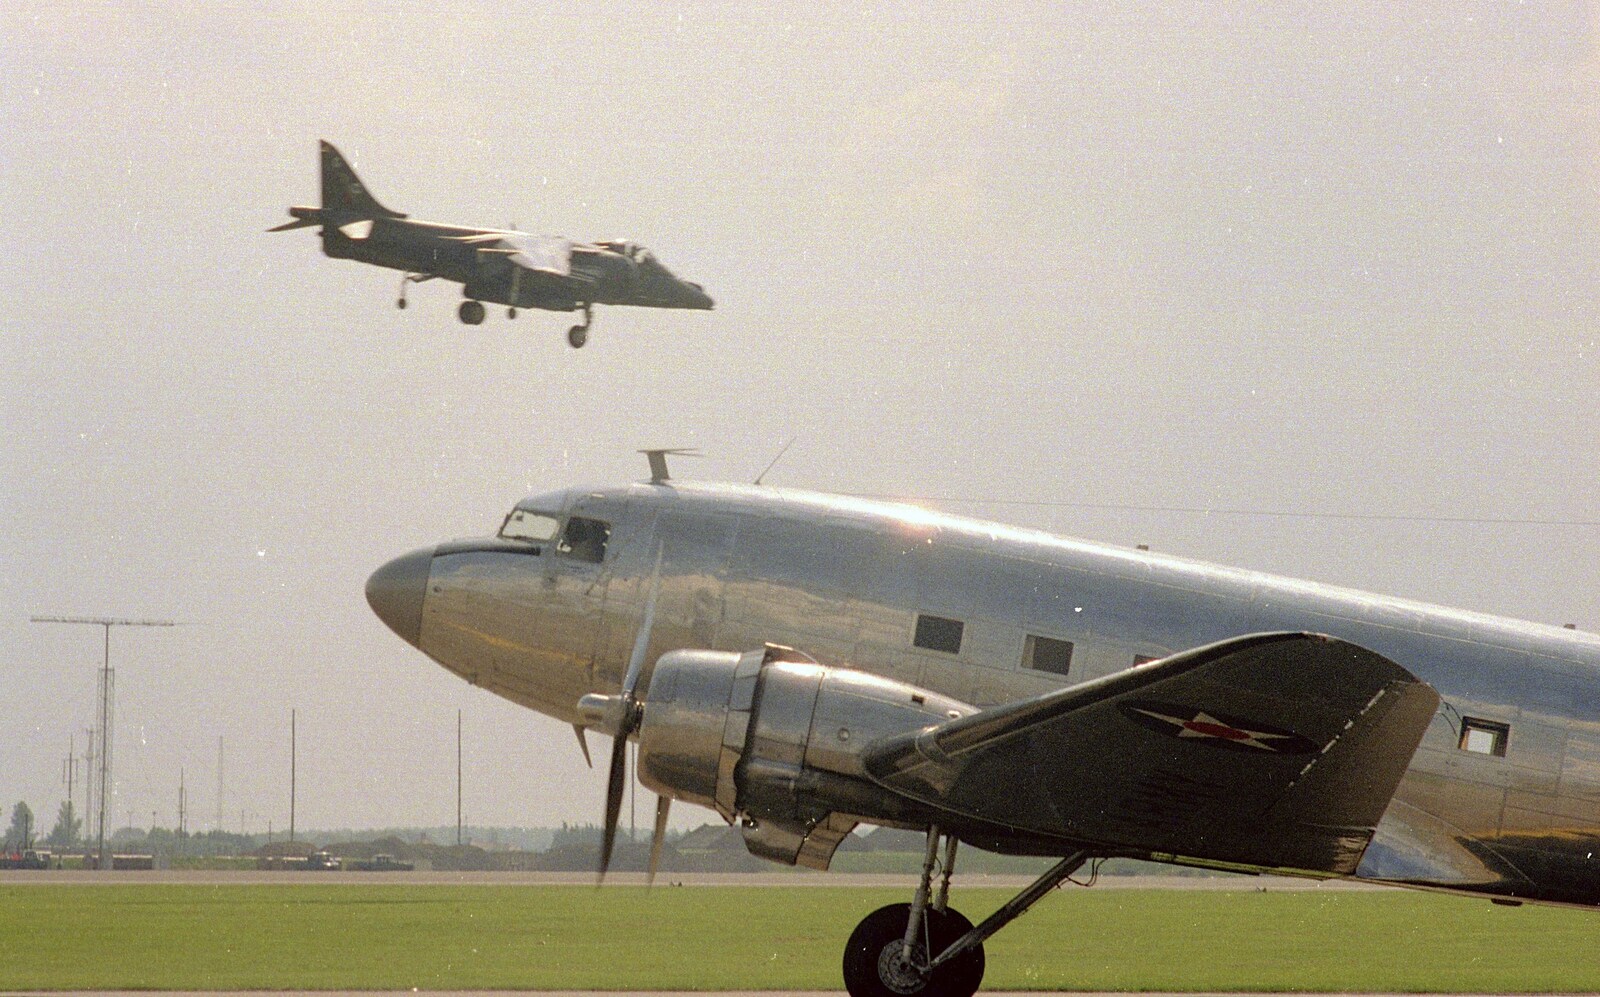 The Harrier flies past a taxiing C-47 from The Mildenhall Air Fete, Mildenhall, Suffolk - 29th May 1994